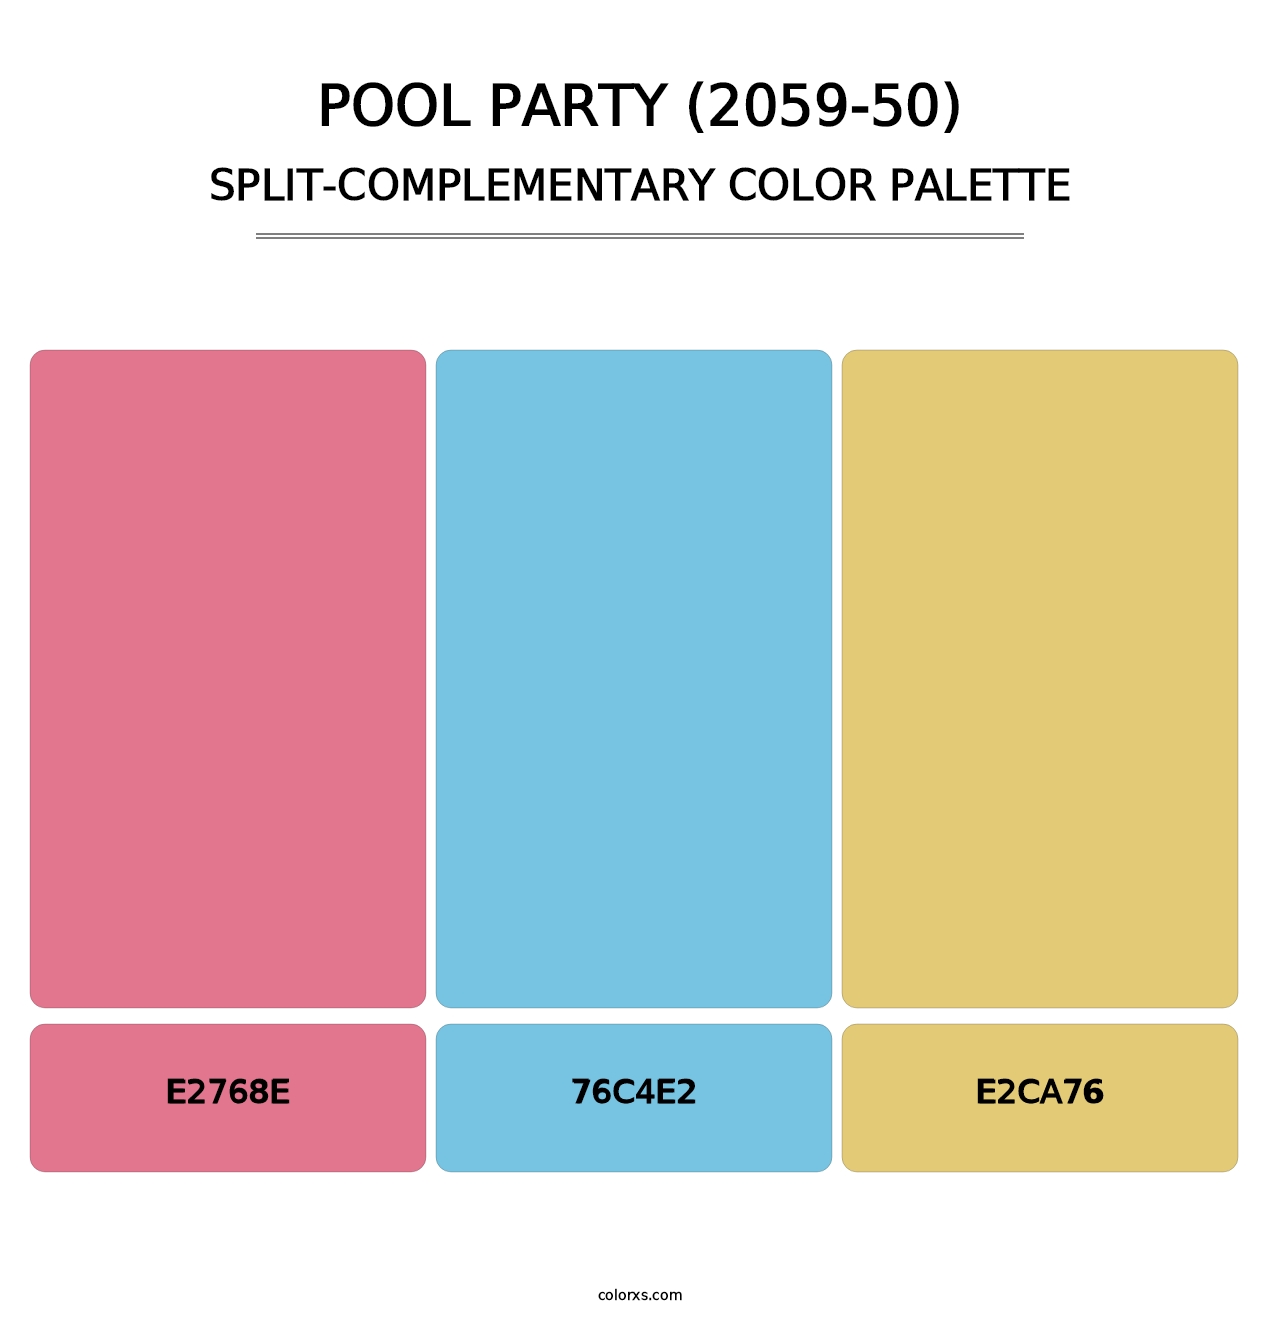 Pool Party (2059-50) - Split-Complementary Color Palette